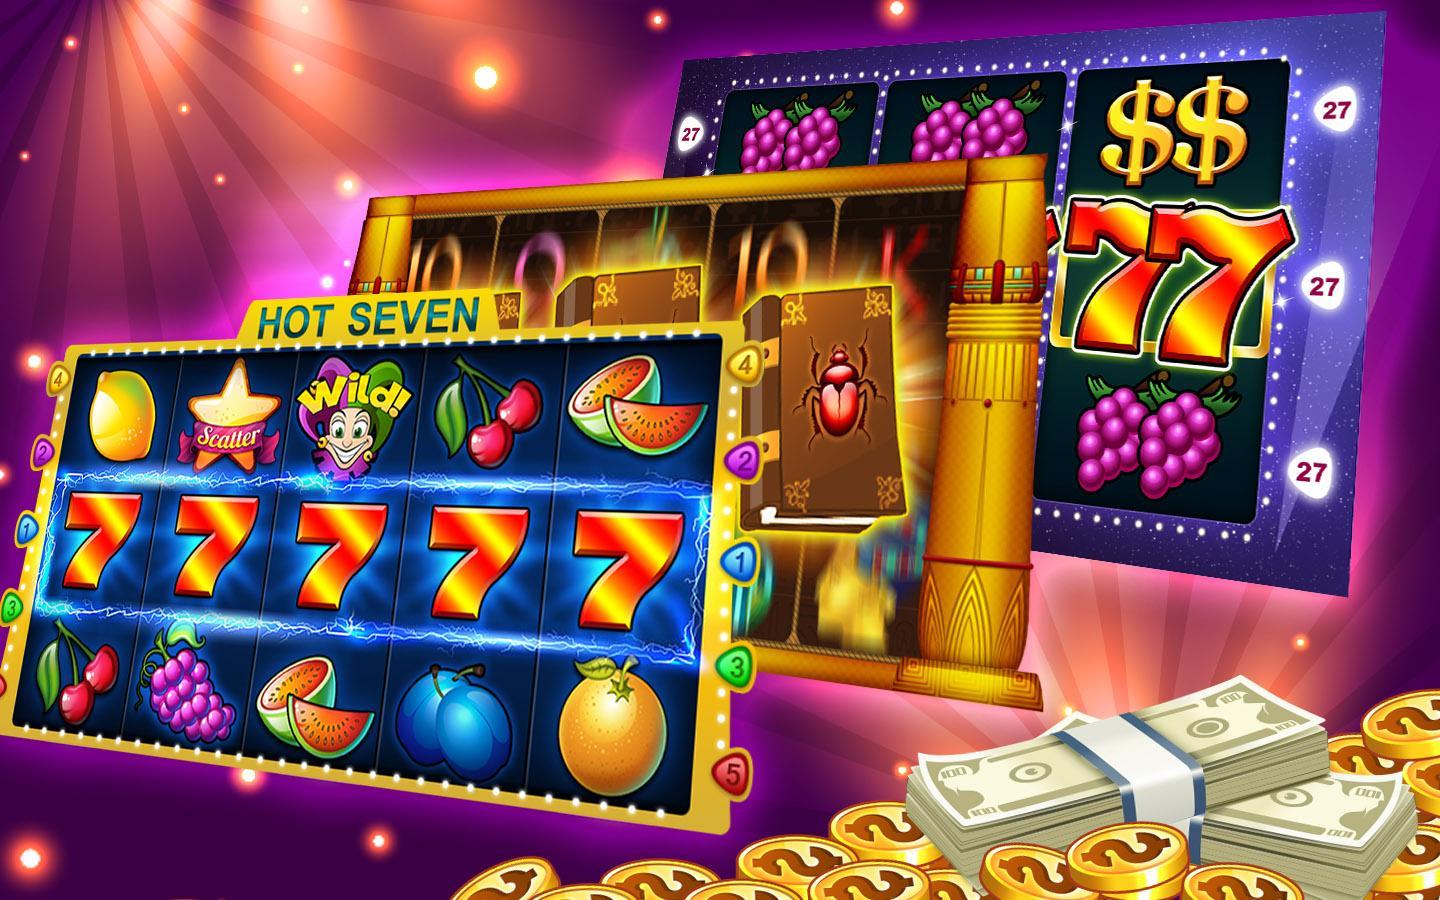 Can slots be played in cell phones